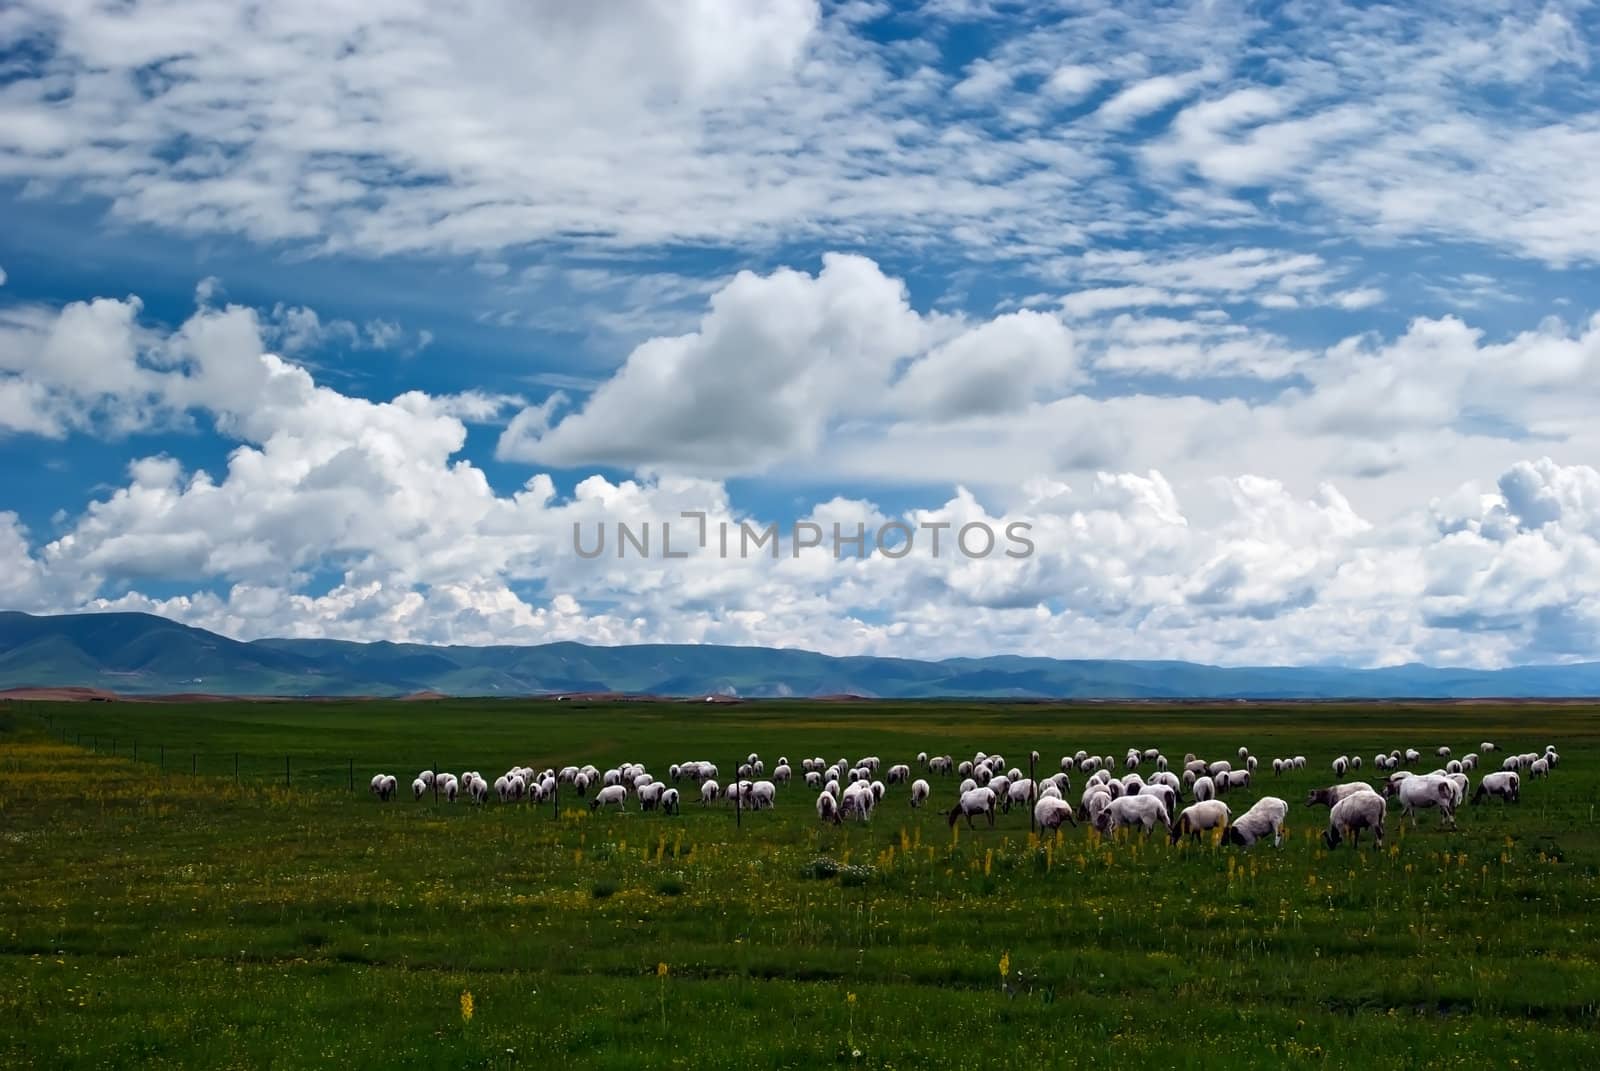 Here is China's Qinghai Province, Highlands Ranch